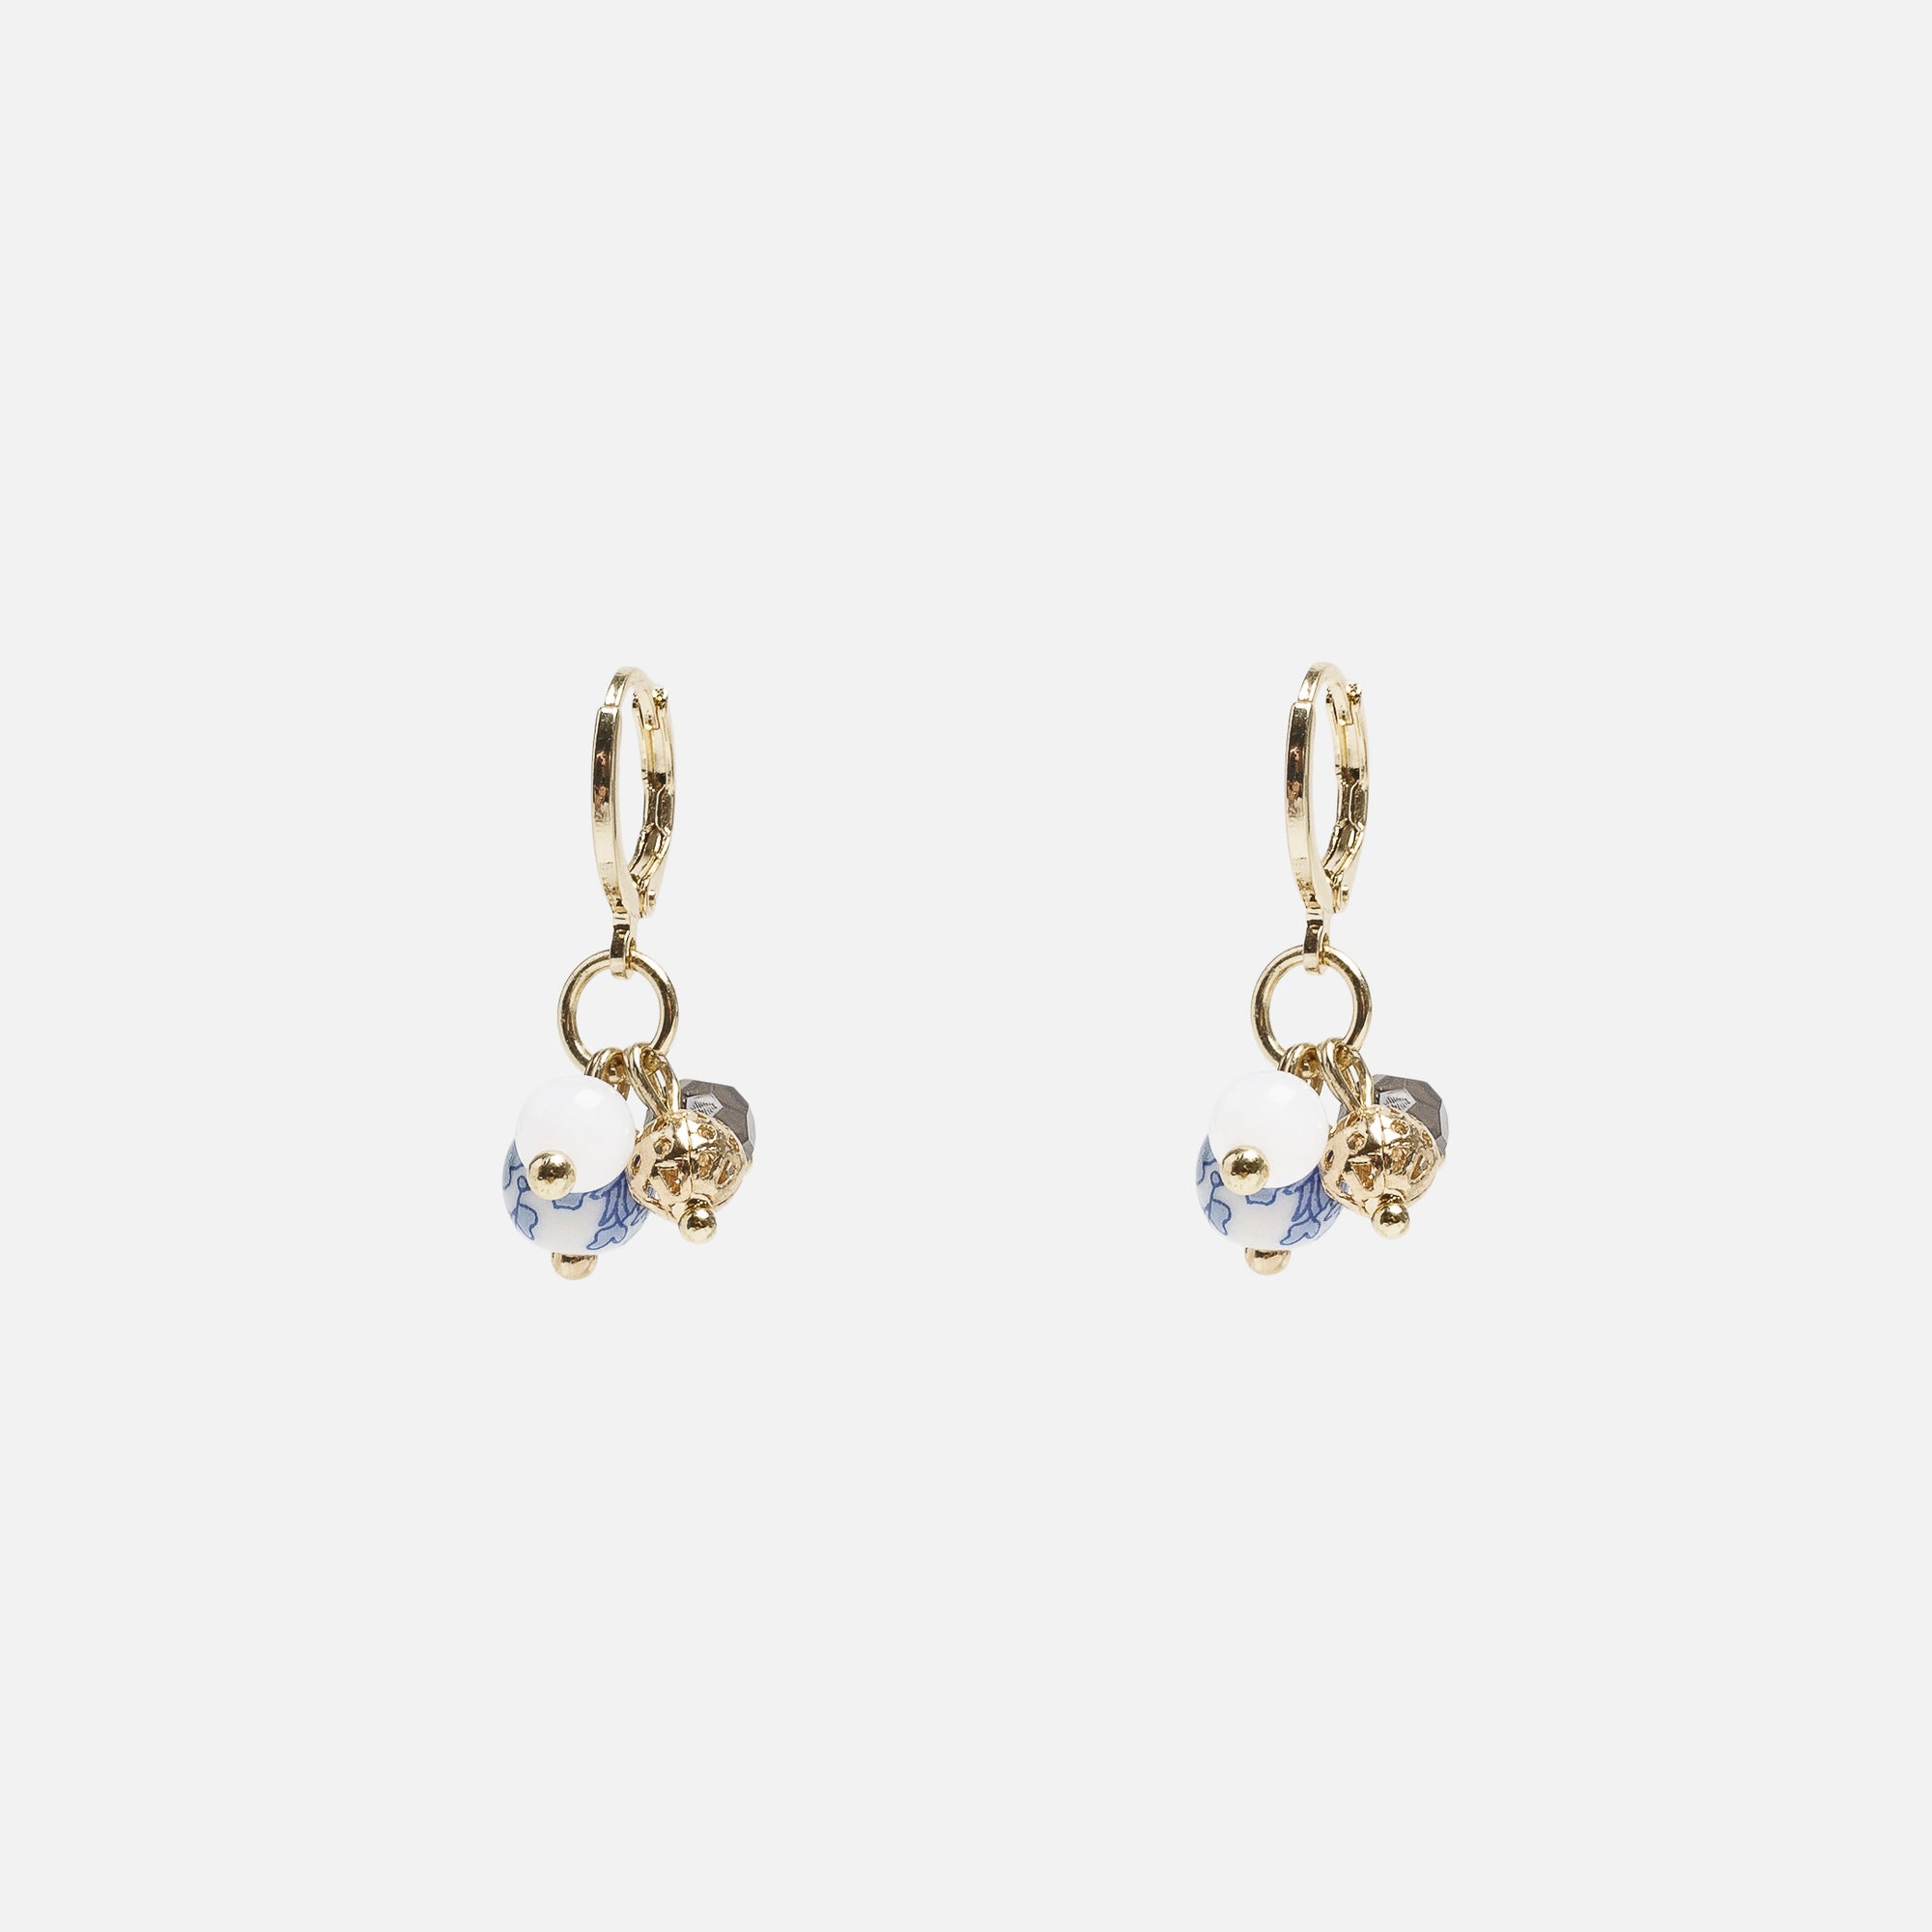 Golden hoop earrings with charms